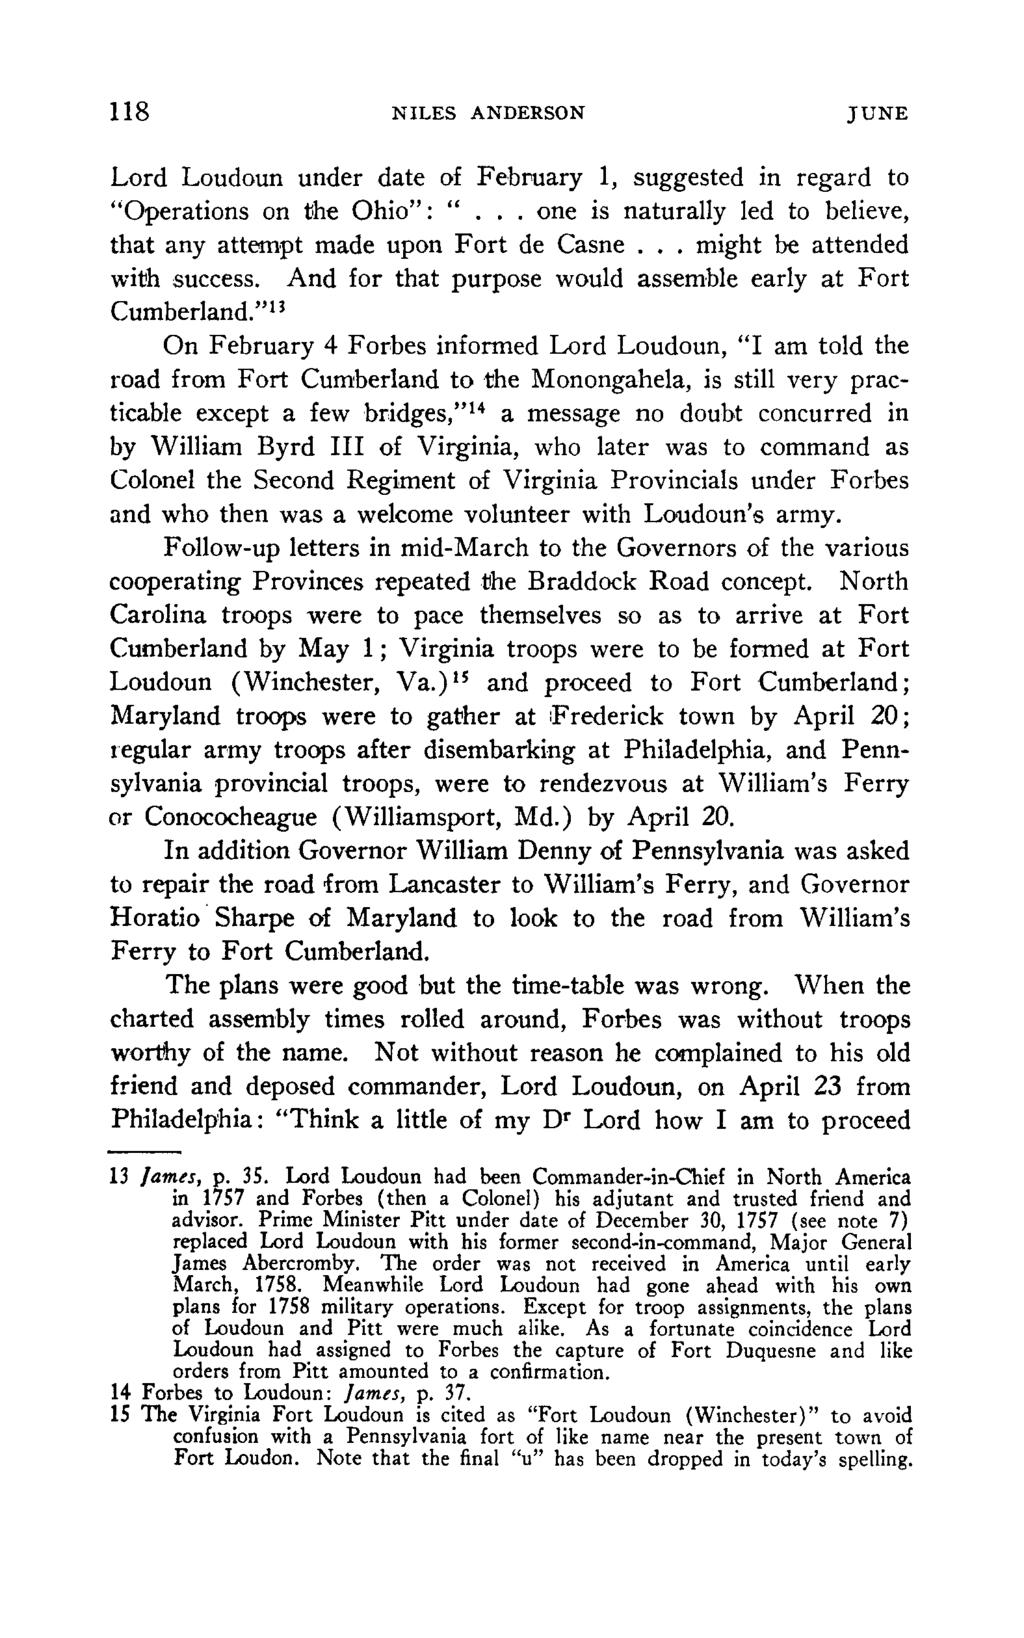 118 NILES ANDERSON JUNE Lord Loudoun under date of February 1, suggested in regard to "Operations on the Ohio": "... one is naturally led to believe, that any attempt made upon Fort de Casne.